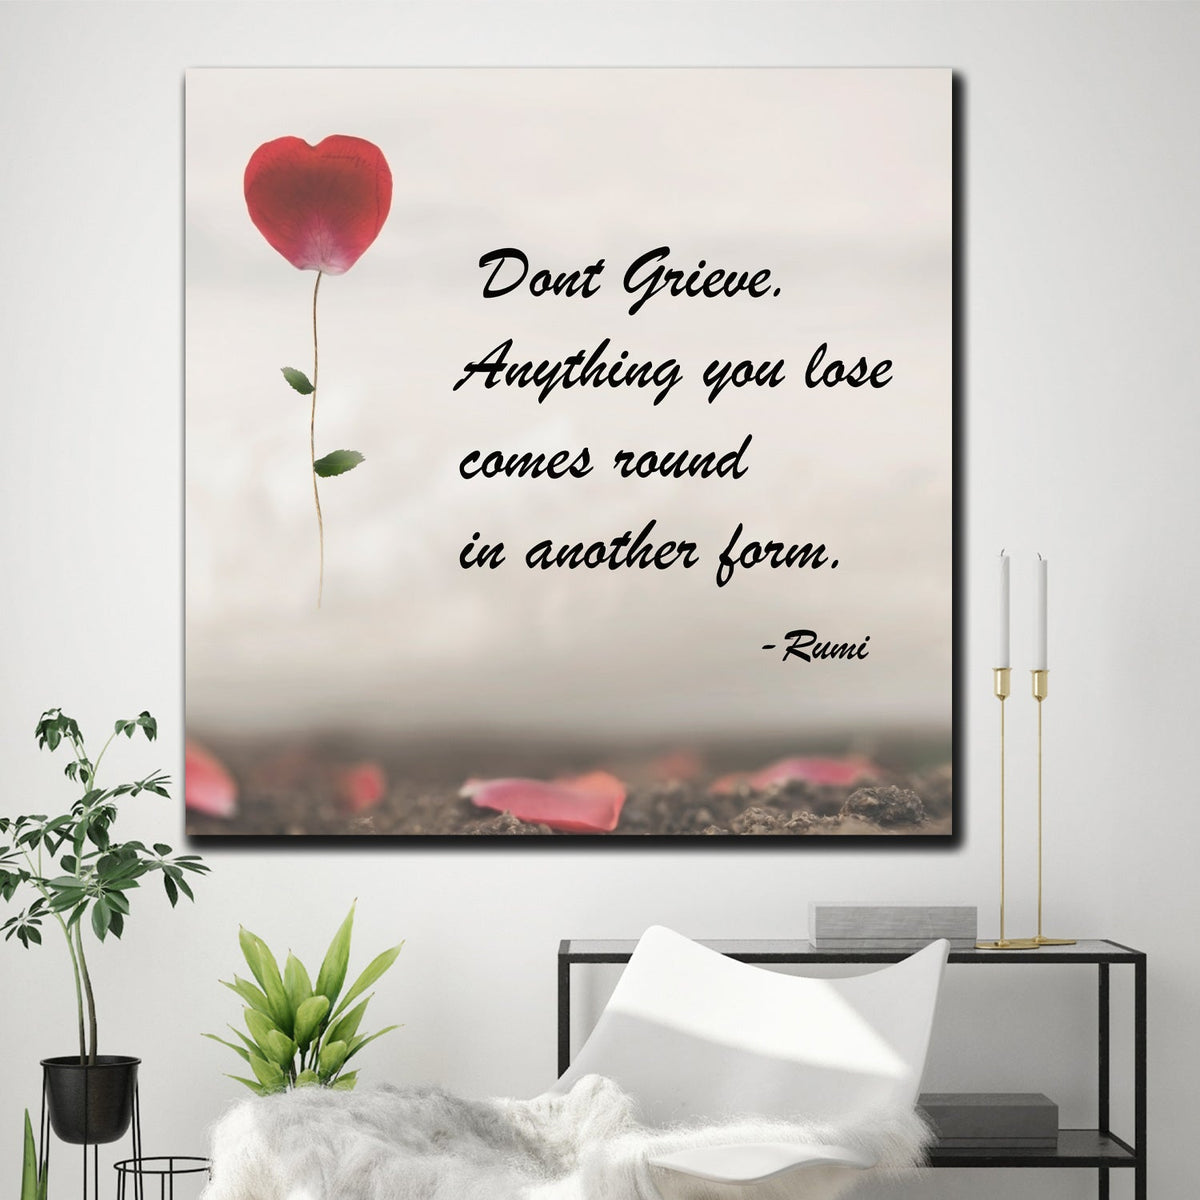 https://cdn.shopify.com/s/files/1/0387/9986/8044/products/Don_tGrieveCanvasArtprintStretched-1.jpg